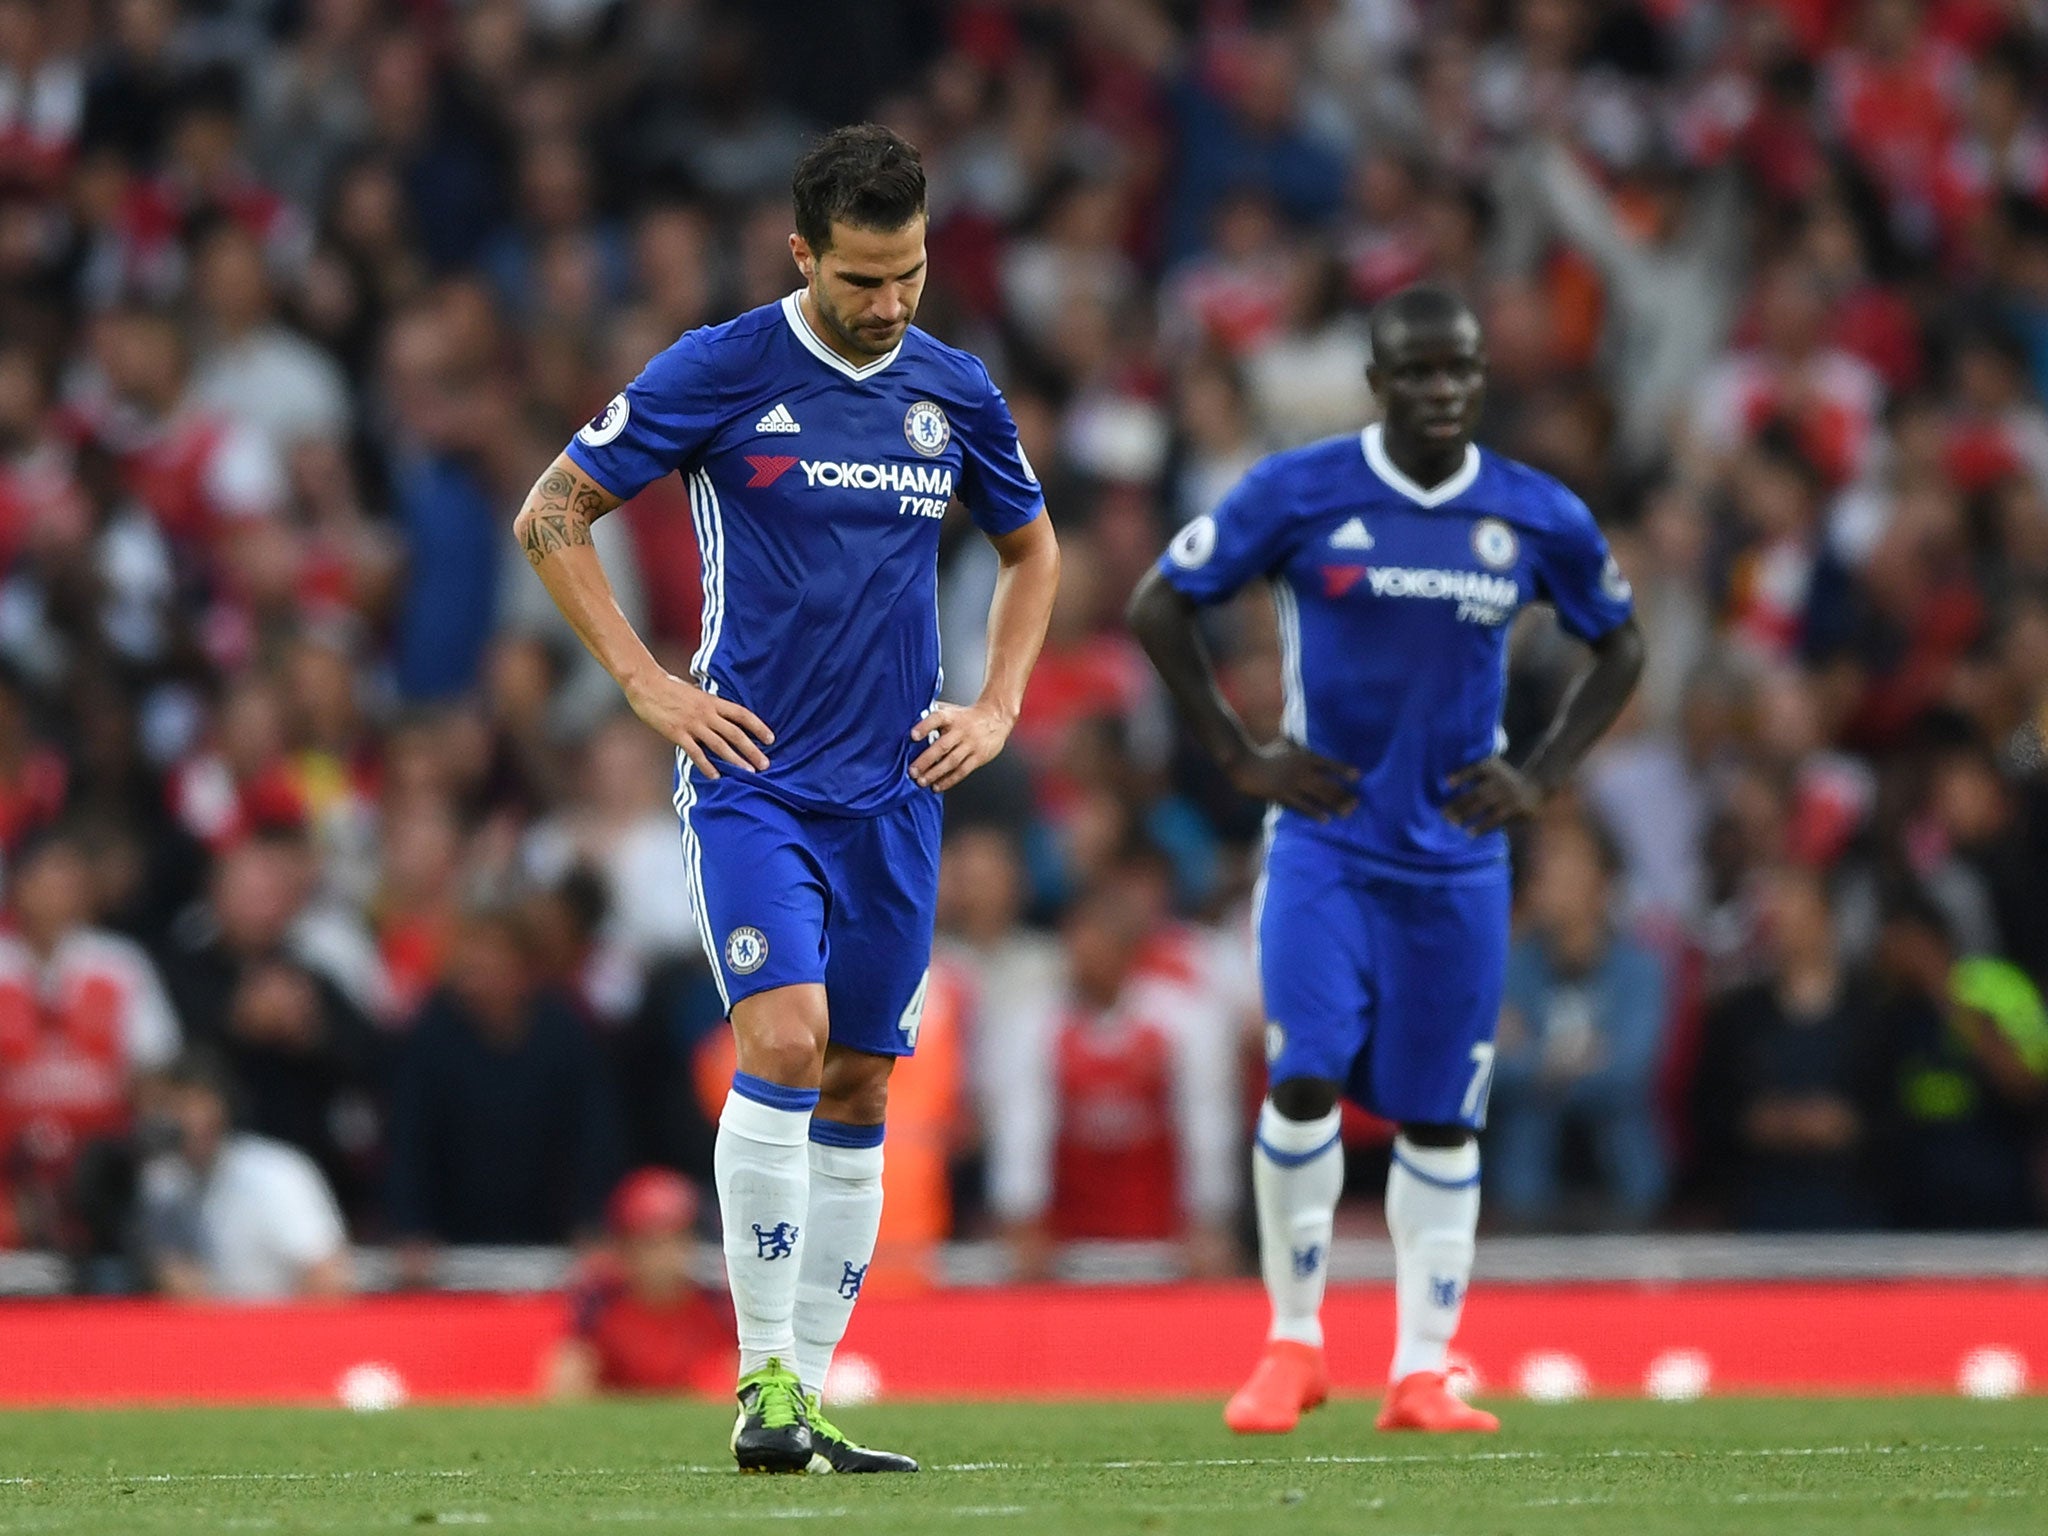 Cesc Fabregas cuts a dejected figure during his side's 3-0 defeat by Arsenal